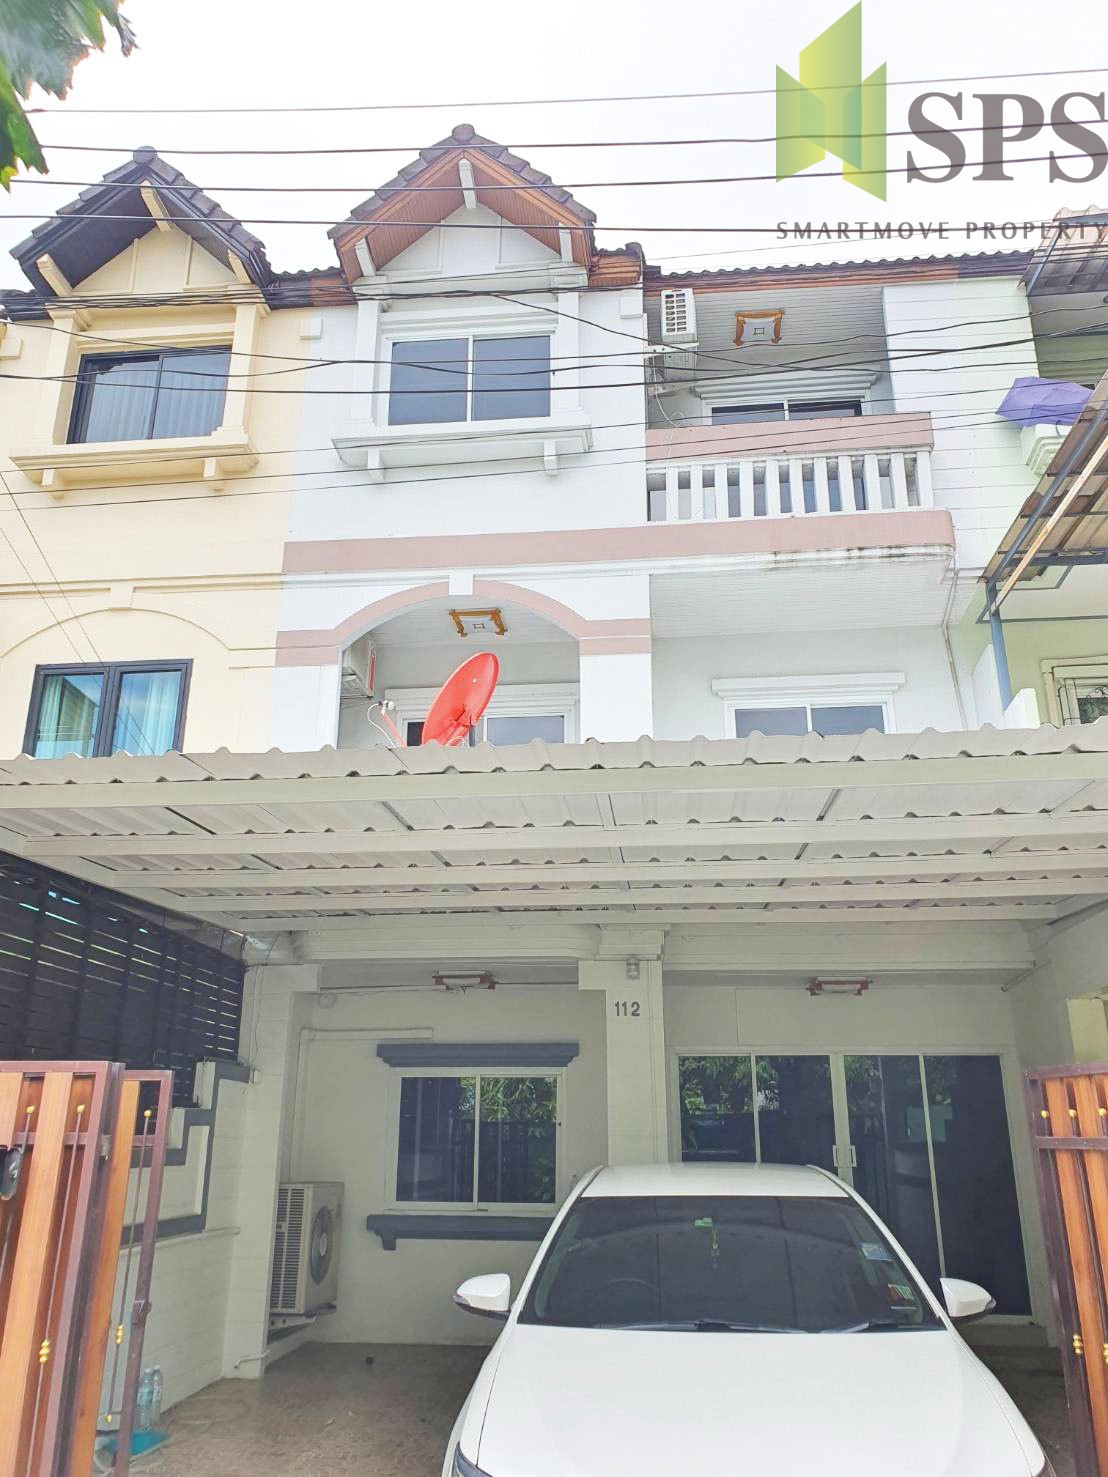 Townhome for RENT / SALE in Sukhumvit 66/1 (SPSP306)